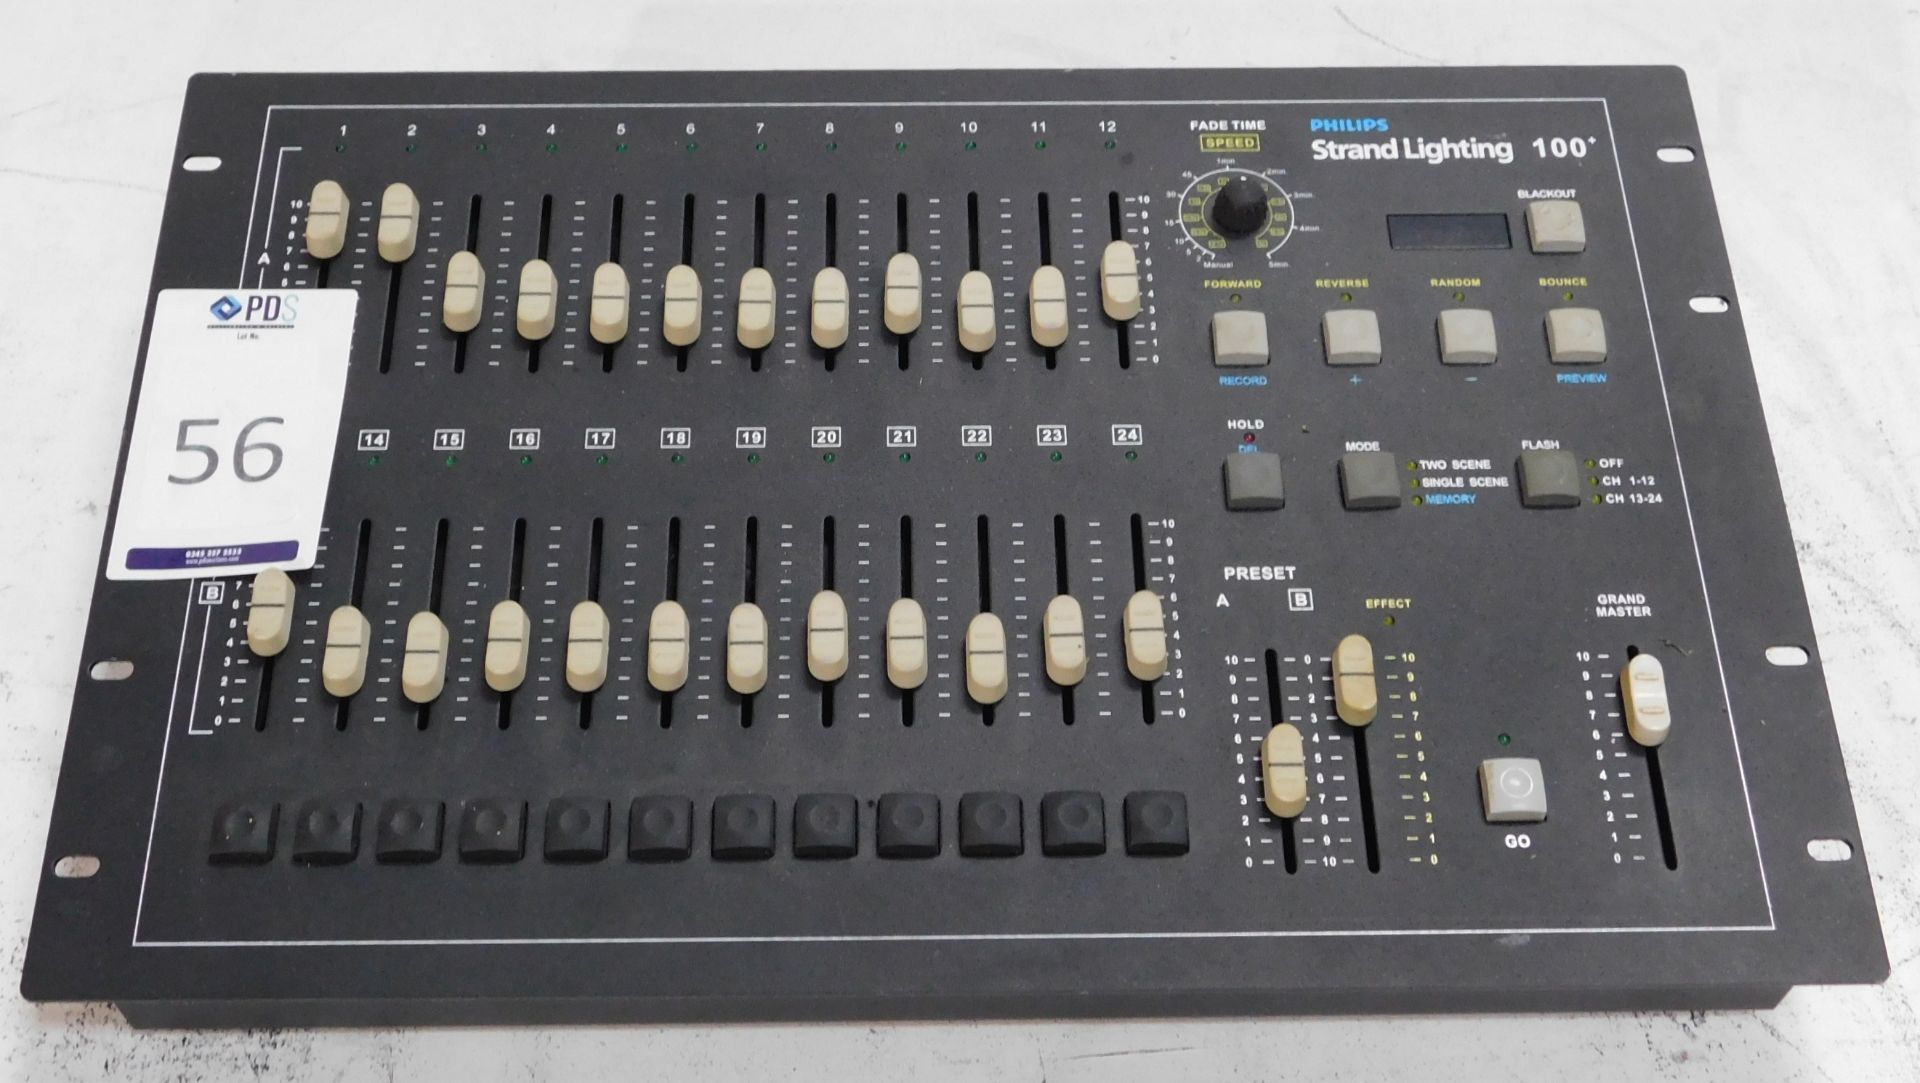 Philips Strand Lighting 100+ Lighting Control Desk (Location Brentwood. Please Refer to General